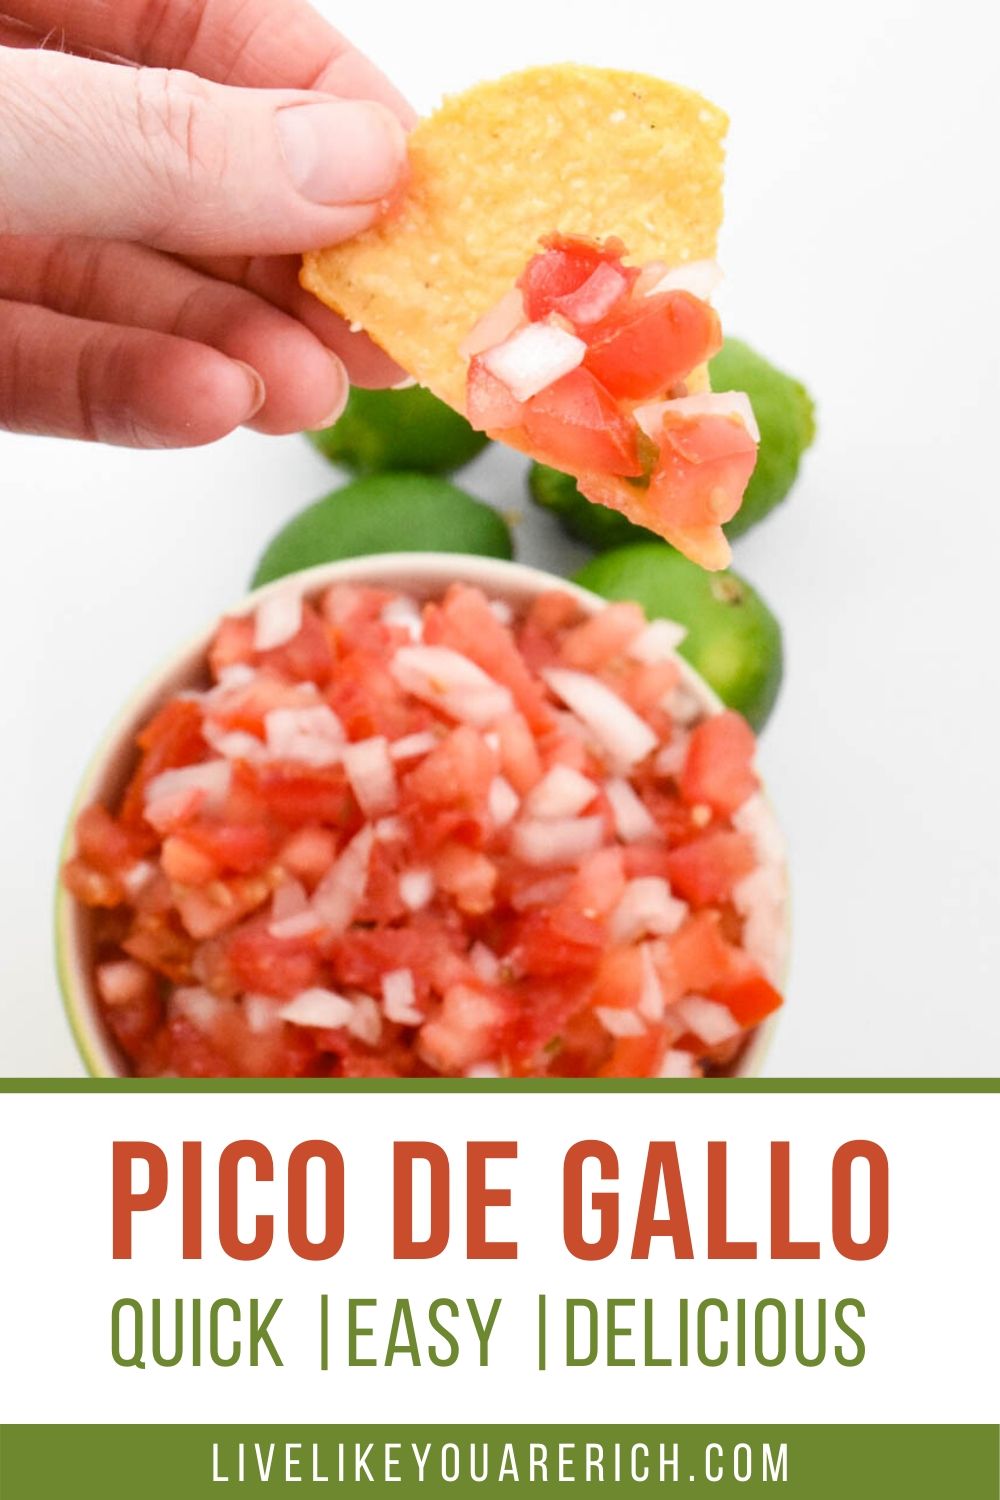 This is an easy to make yet delicious Pico de Gallo. It is likely going to be the talk of the party. I’m so excited to share it with you. I hope you enjoy it as much as I and many others have too.